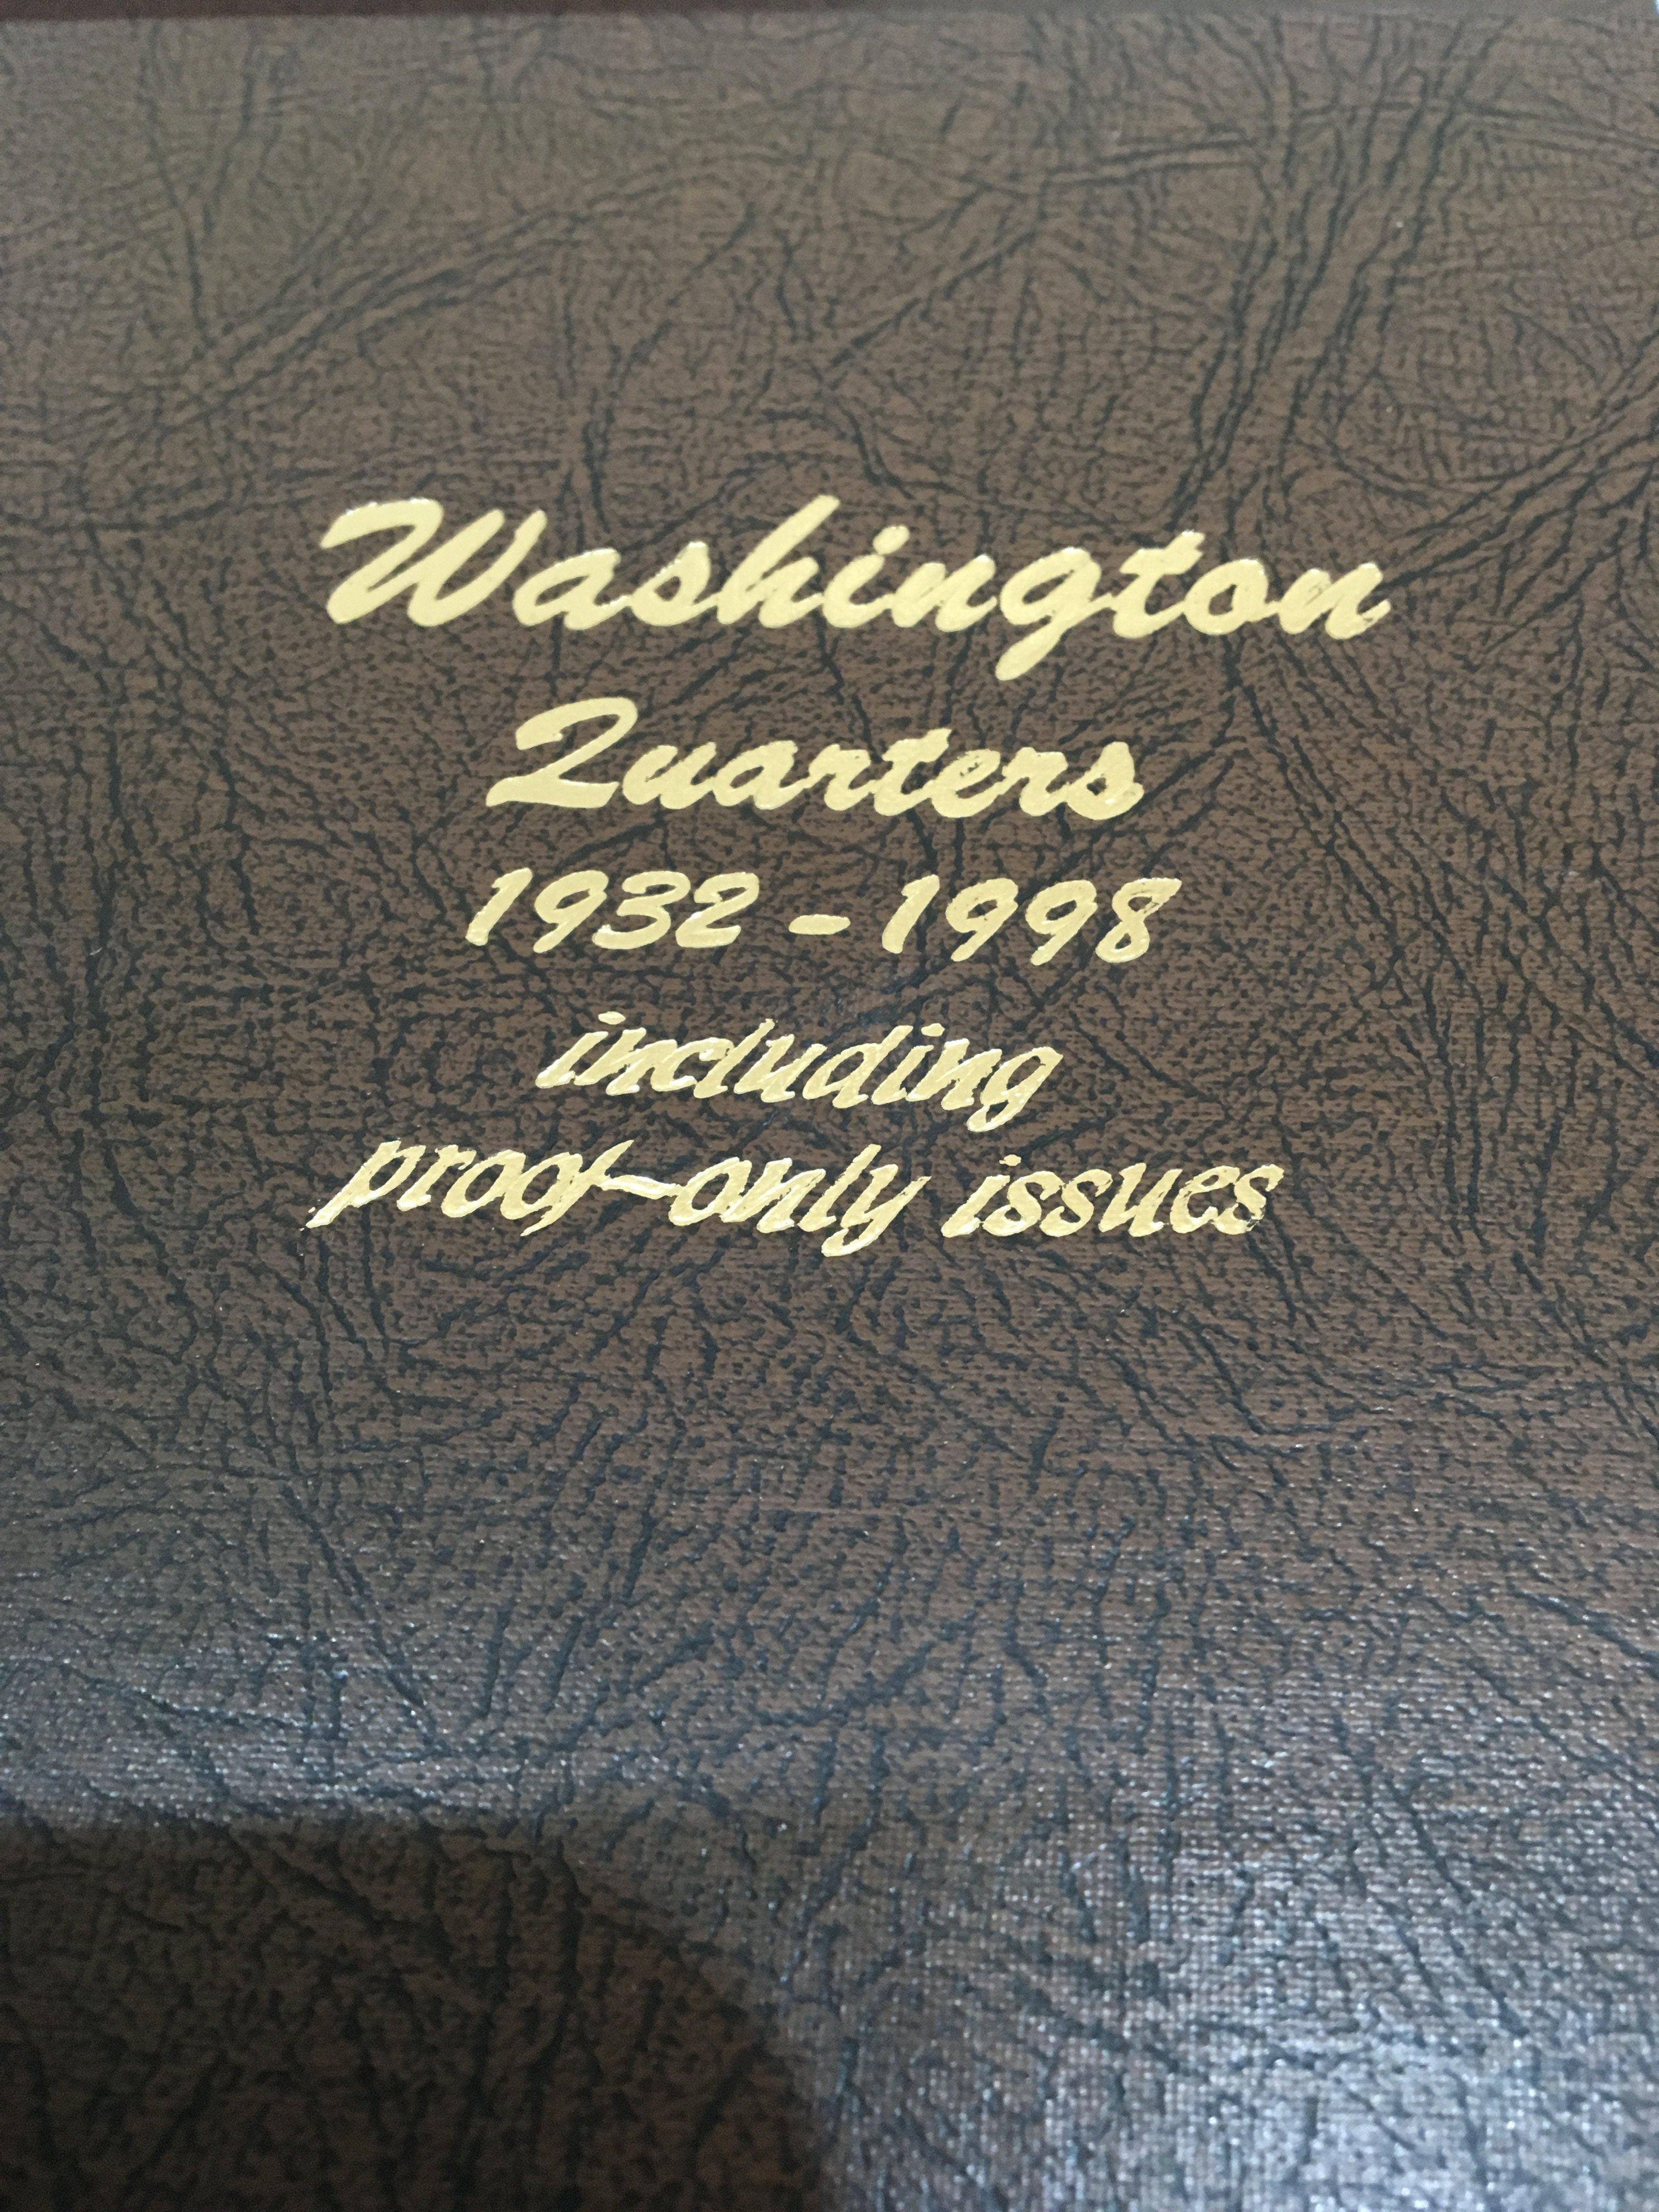 A Full and complete set of Washington Quarters 193 - Image 2 of 2